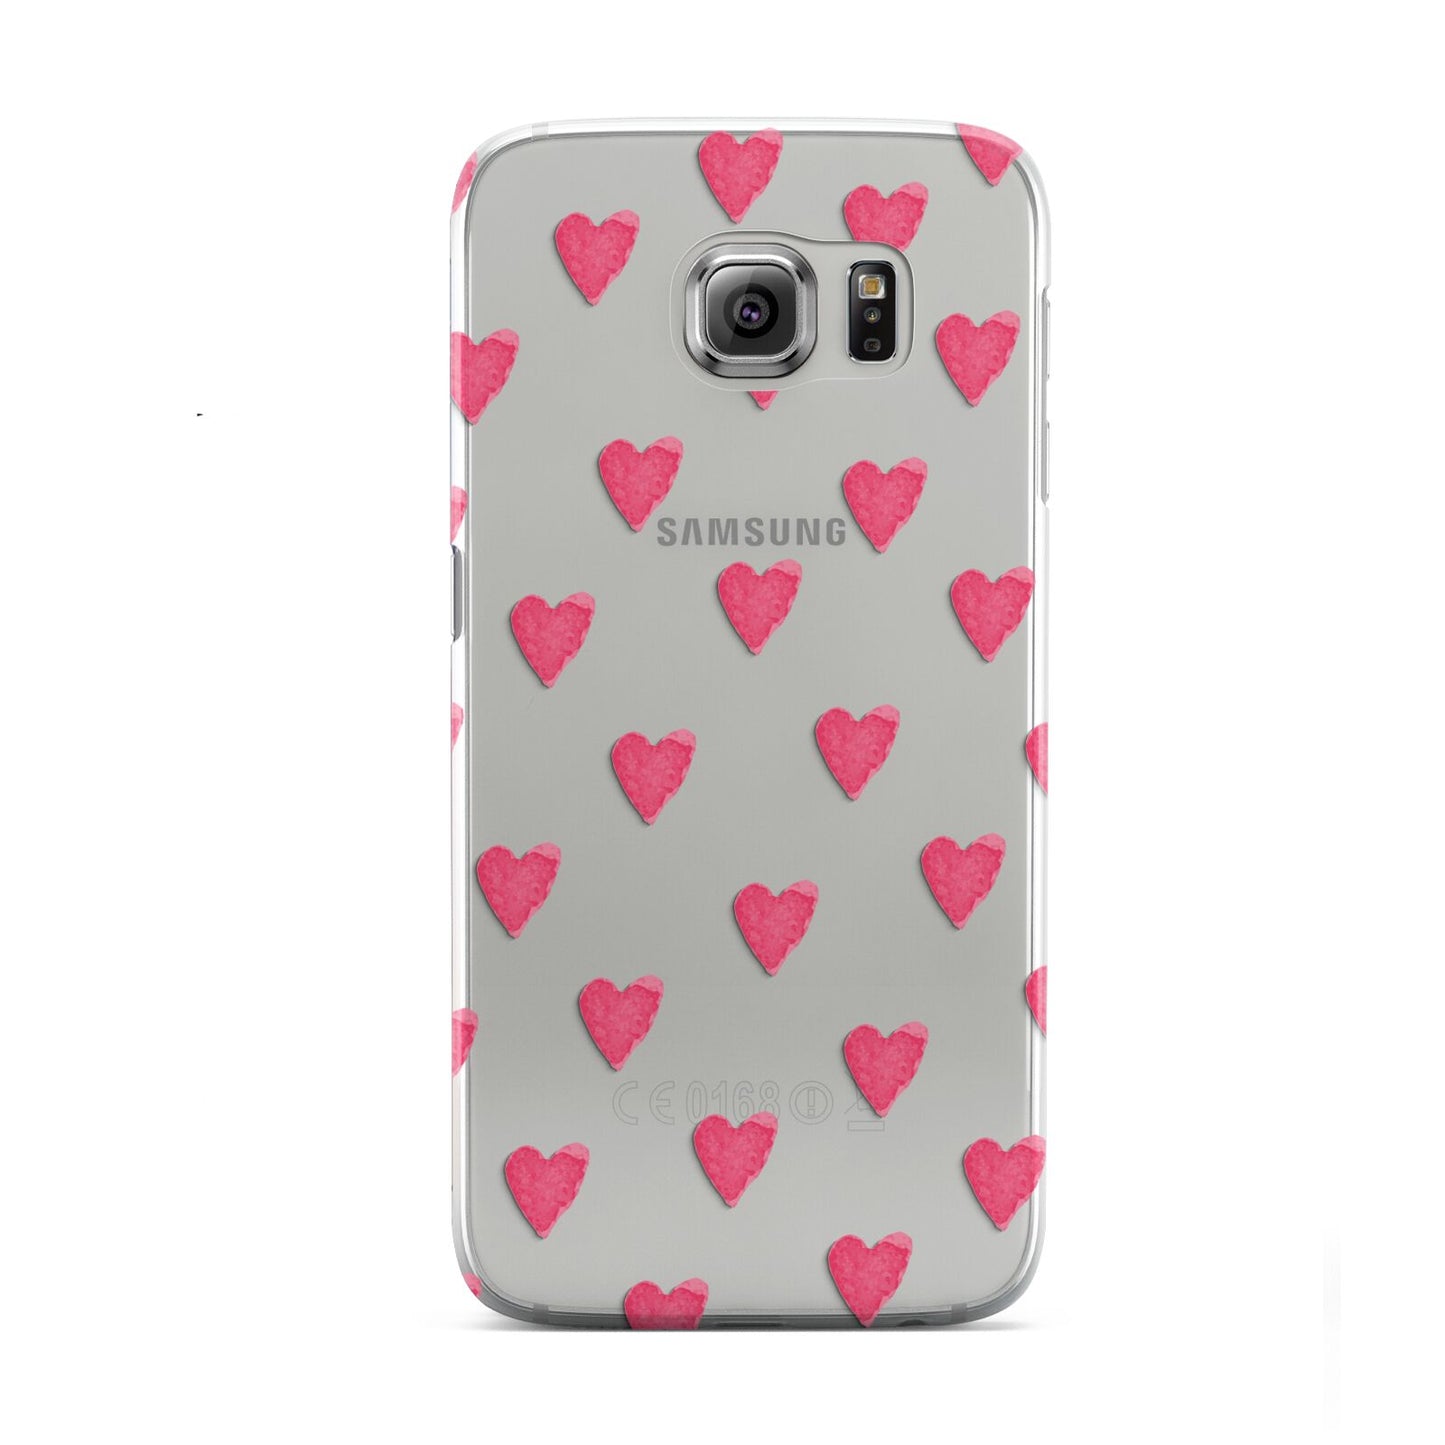 Heart Patterned Samsung Galaxy S6 Case